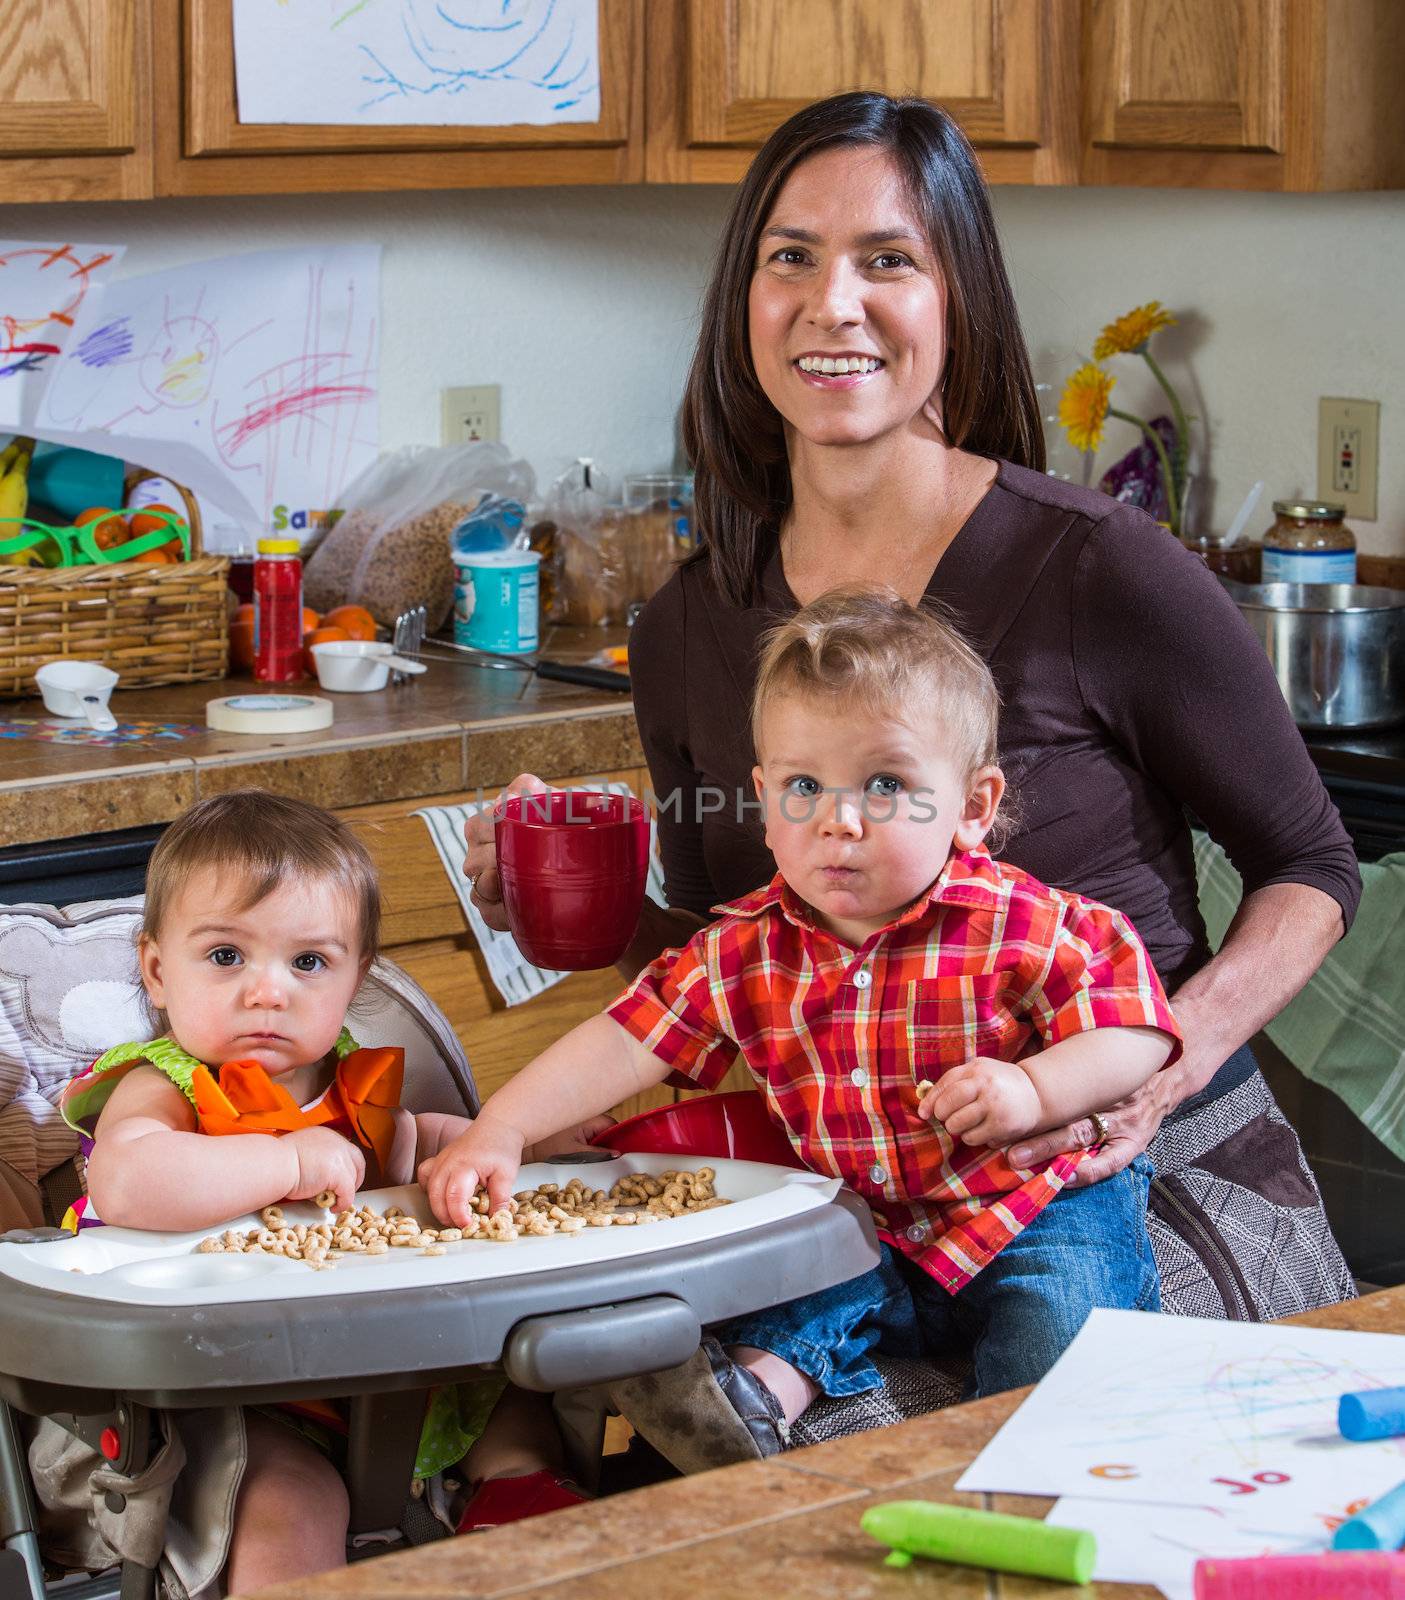 Mother poses with children in the kitchen